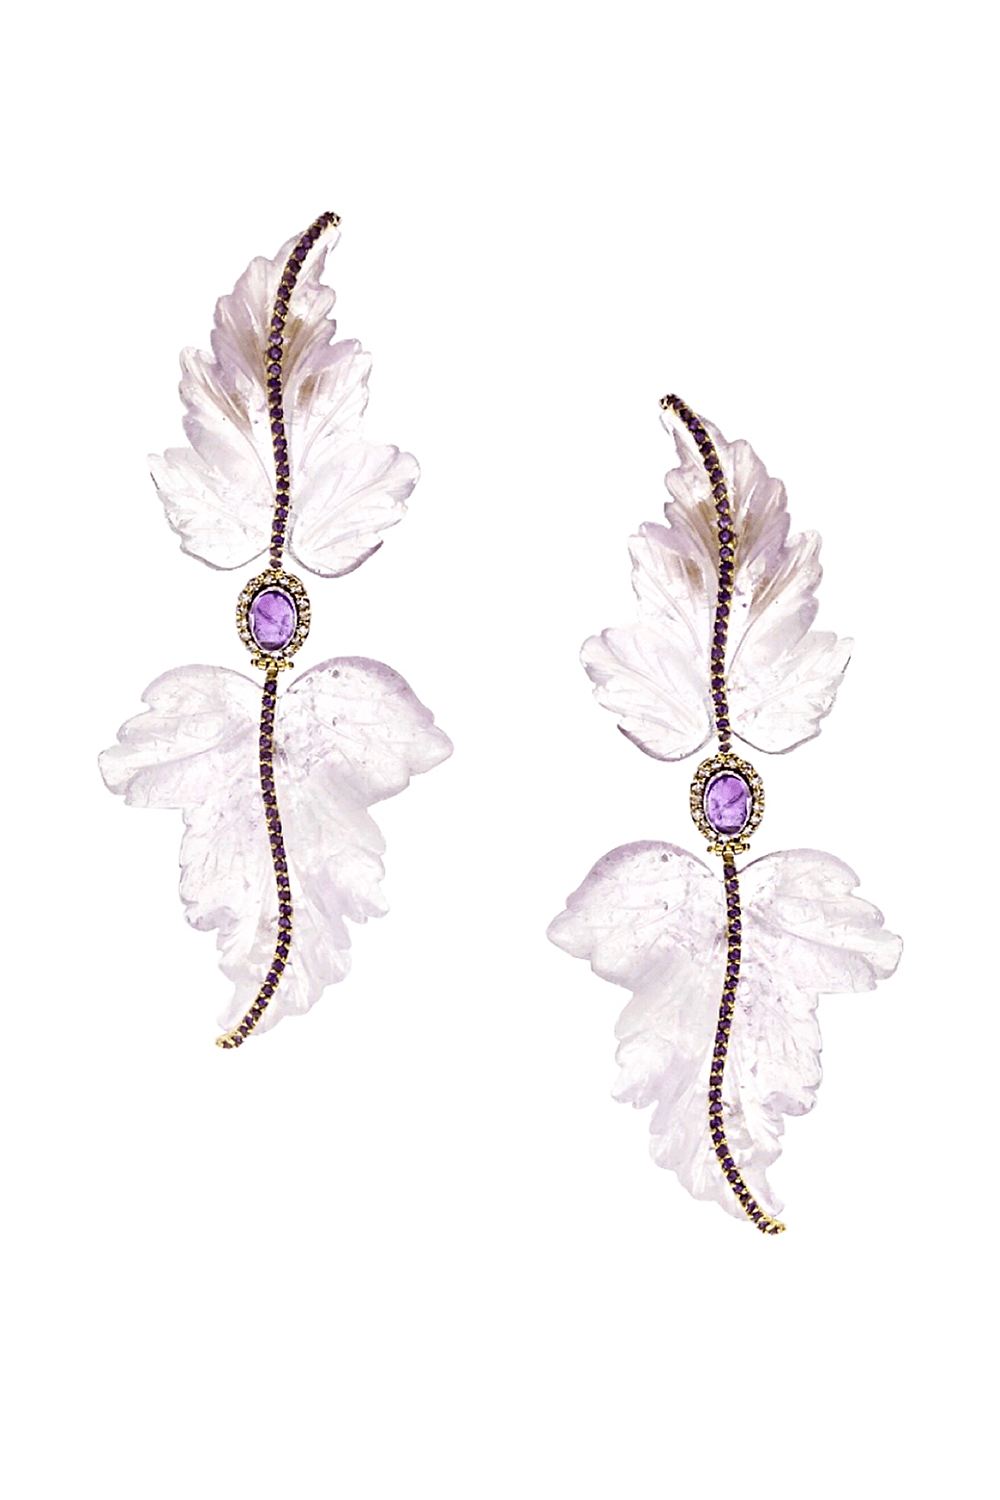 CASA CASTRO-Amethyst Mother Nature Earrings-YELLOW GOLD